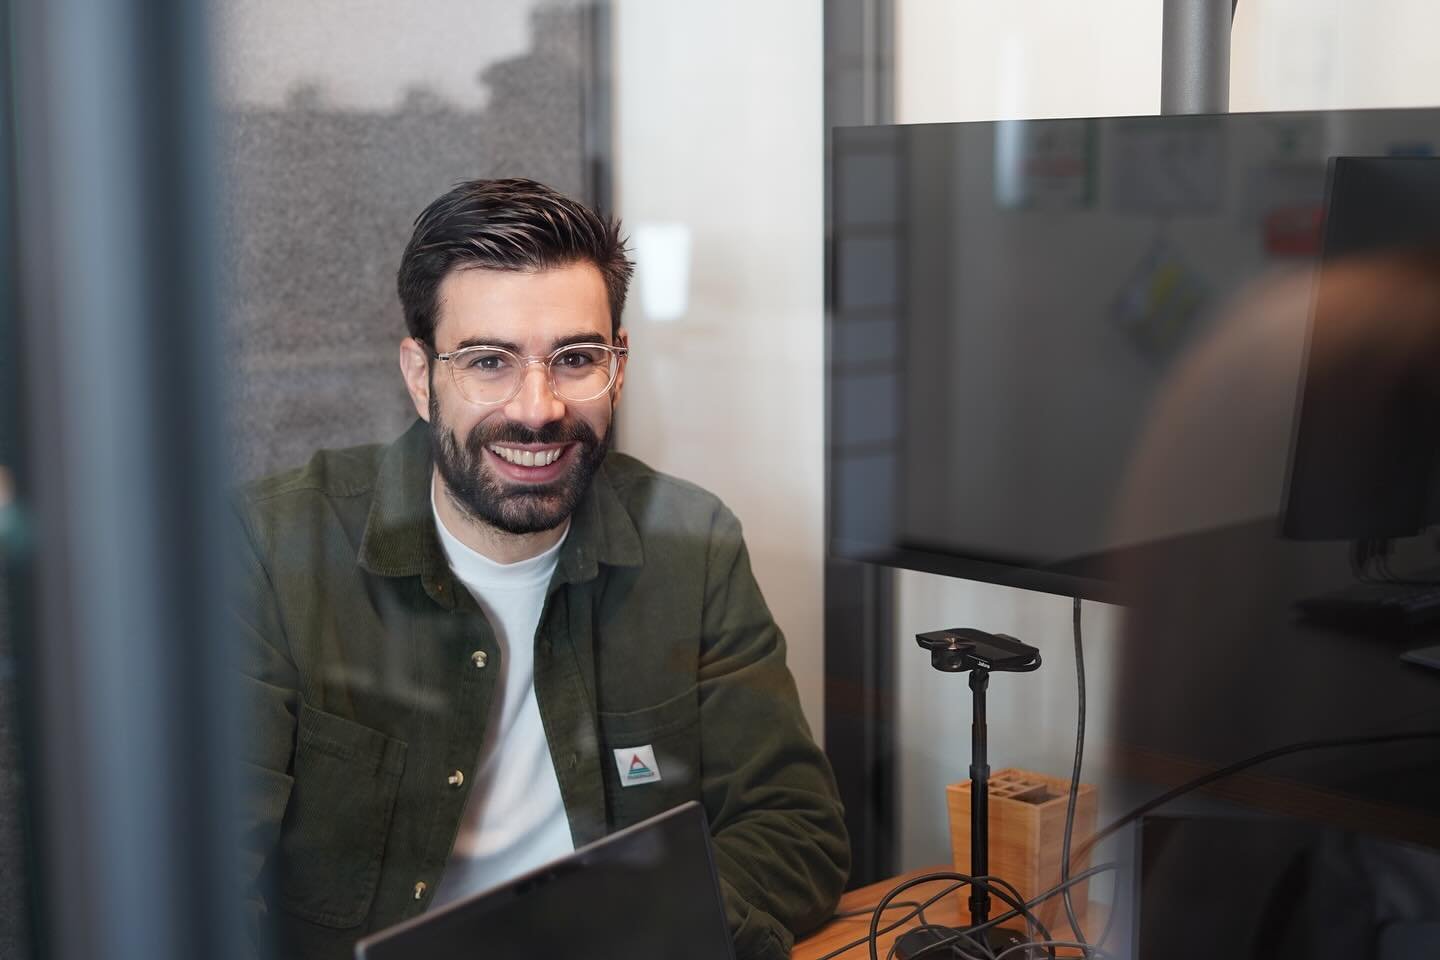 🌍 Multicultural points of view within PURE 🌍
We&rsquo;re thrilled to spotlight Mateo Moreno Pr&oacute;sper, our Sales &amp; Business Development Manager 🚀  Read the full Q&amp;A on LinkedIn #PUREME

𝗤𝟭: 𝗪𝗶𝘁𝗵 𝗮 𝗯𝗮𝗰𝗸𝗴𝗿𝗼𝘂𝗻𝗱 𝘀𝗽𝗮𝗻?